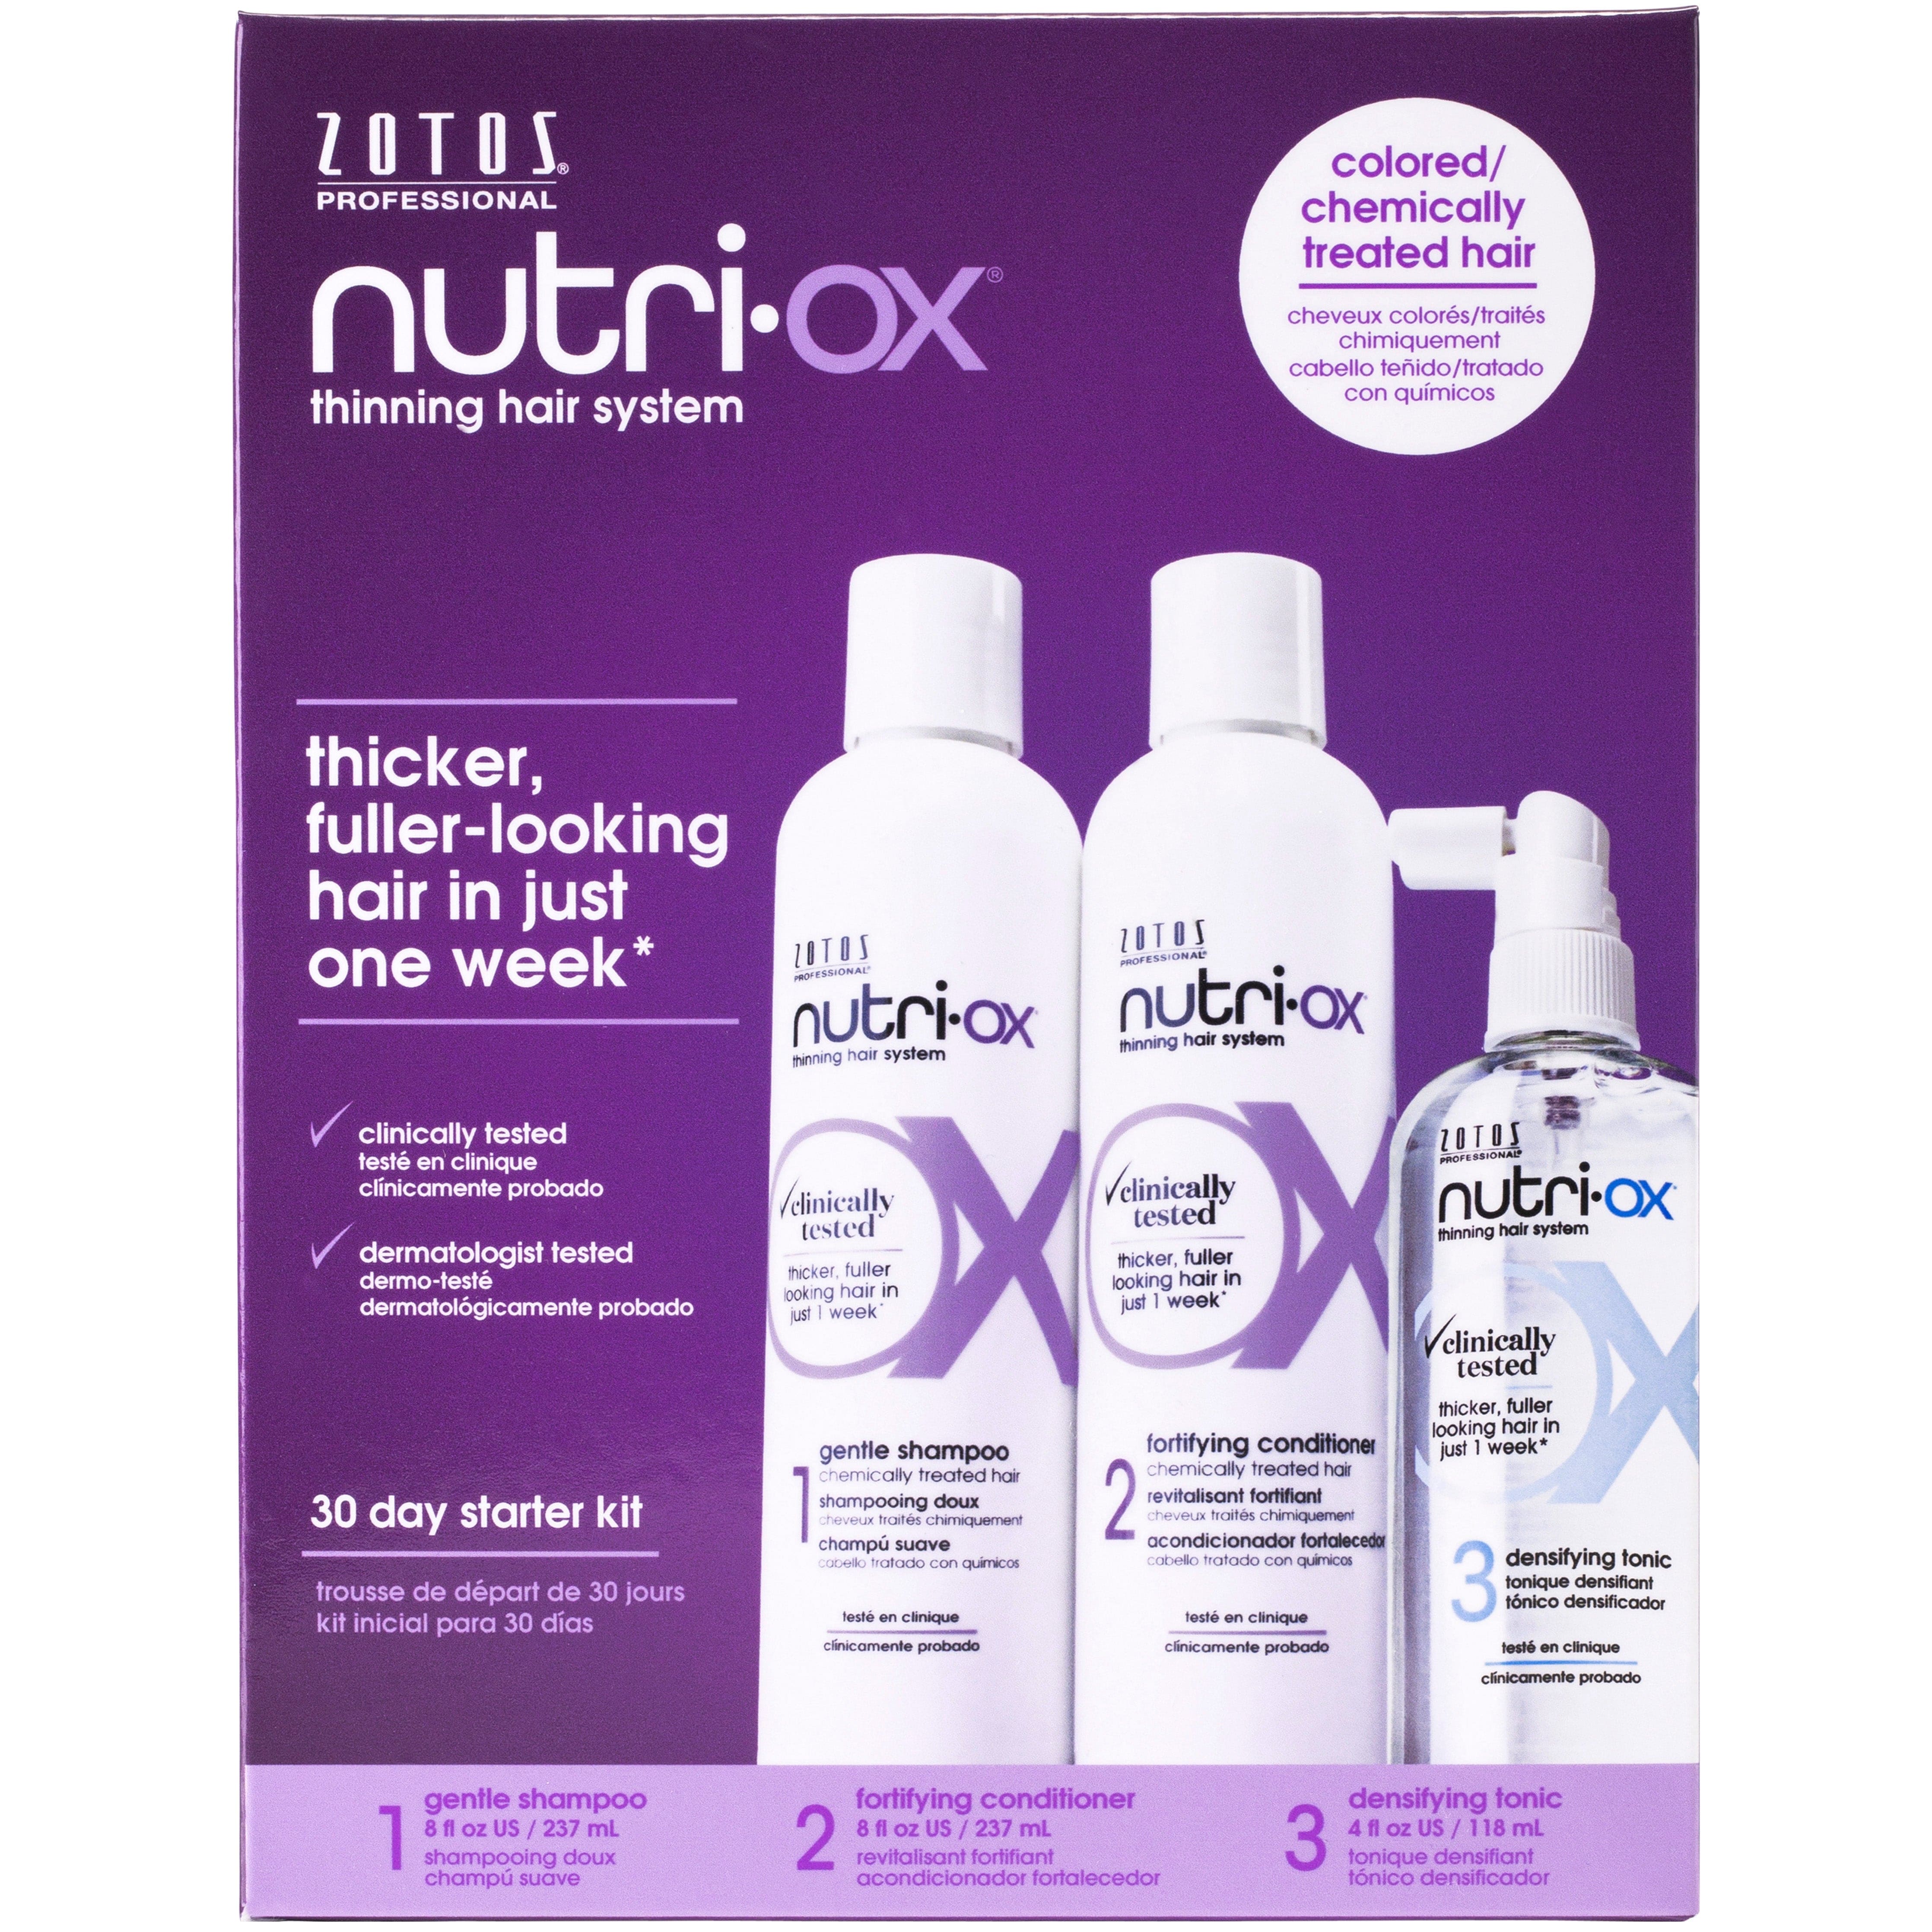 Nutri-Ox Thinning Hair System for Colored/Chemically Treated Hair, including: Gentle shampoo, fortifying conditioner, and densifying tonic